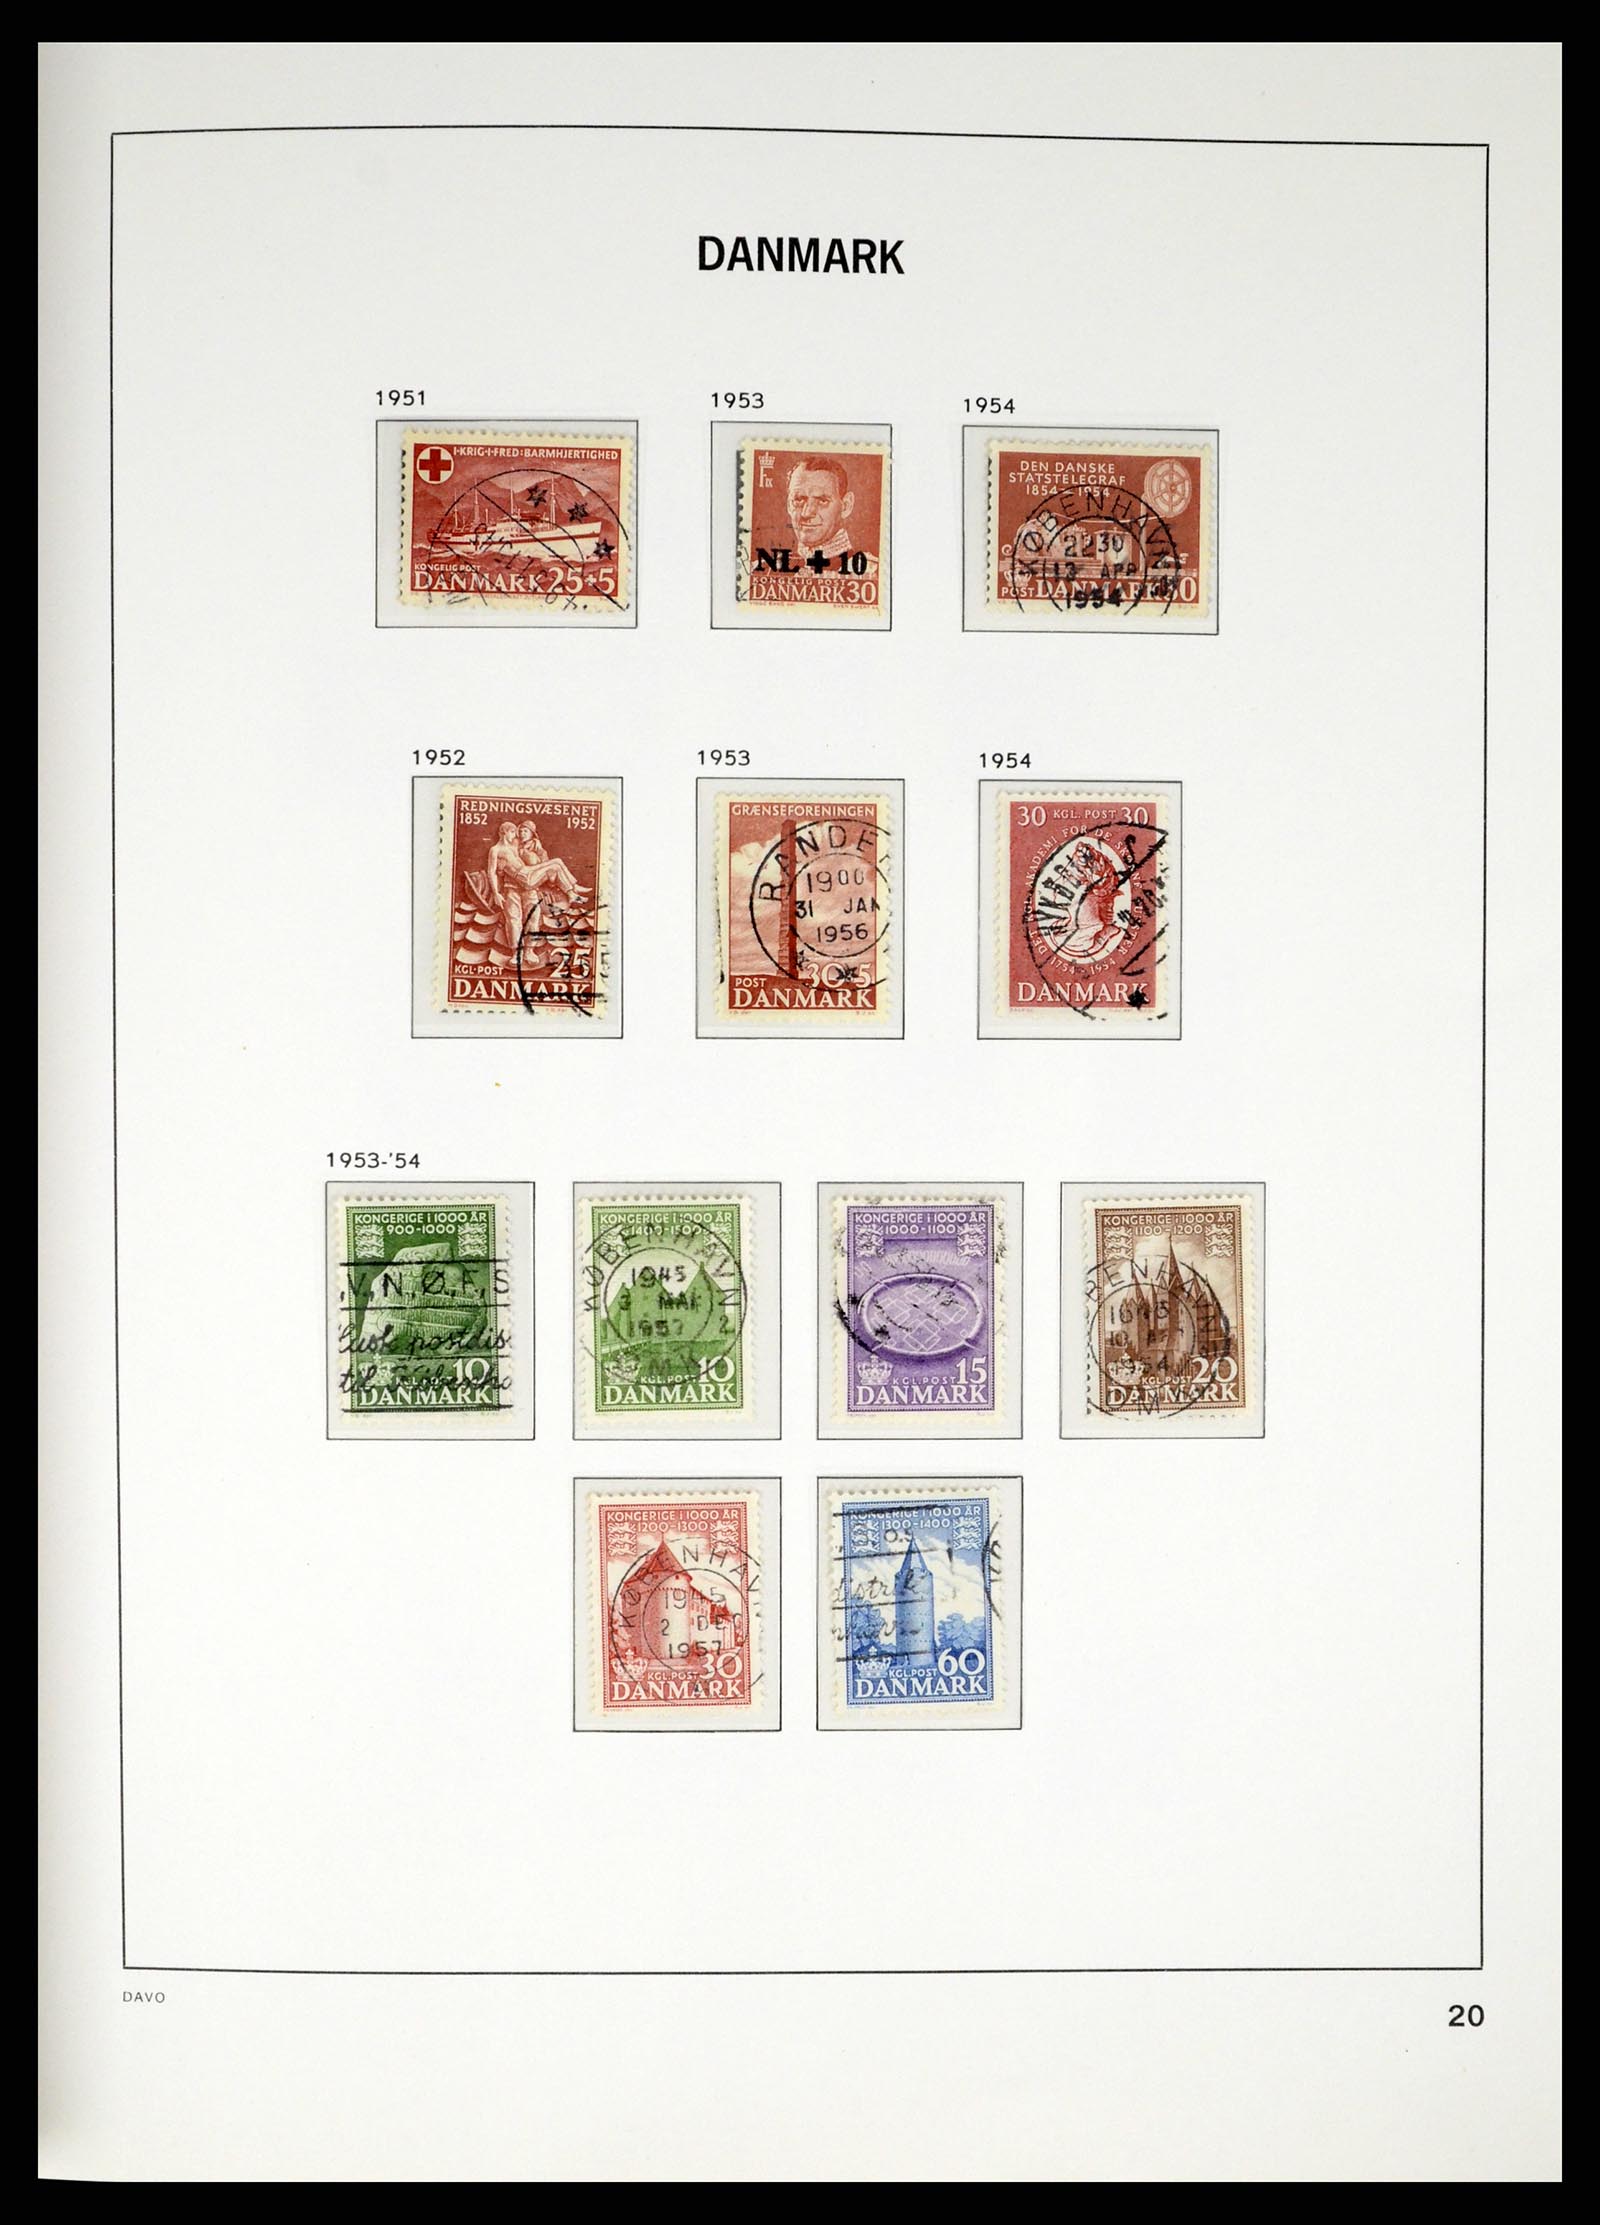 37383 020 - Stamp collection 37383 Denmark 1851-1969.